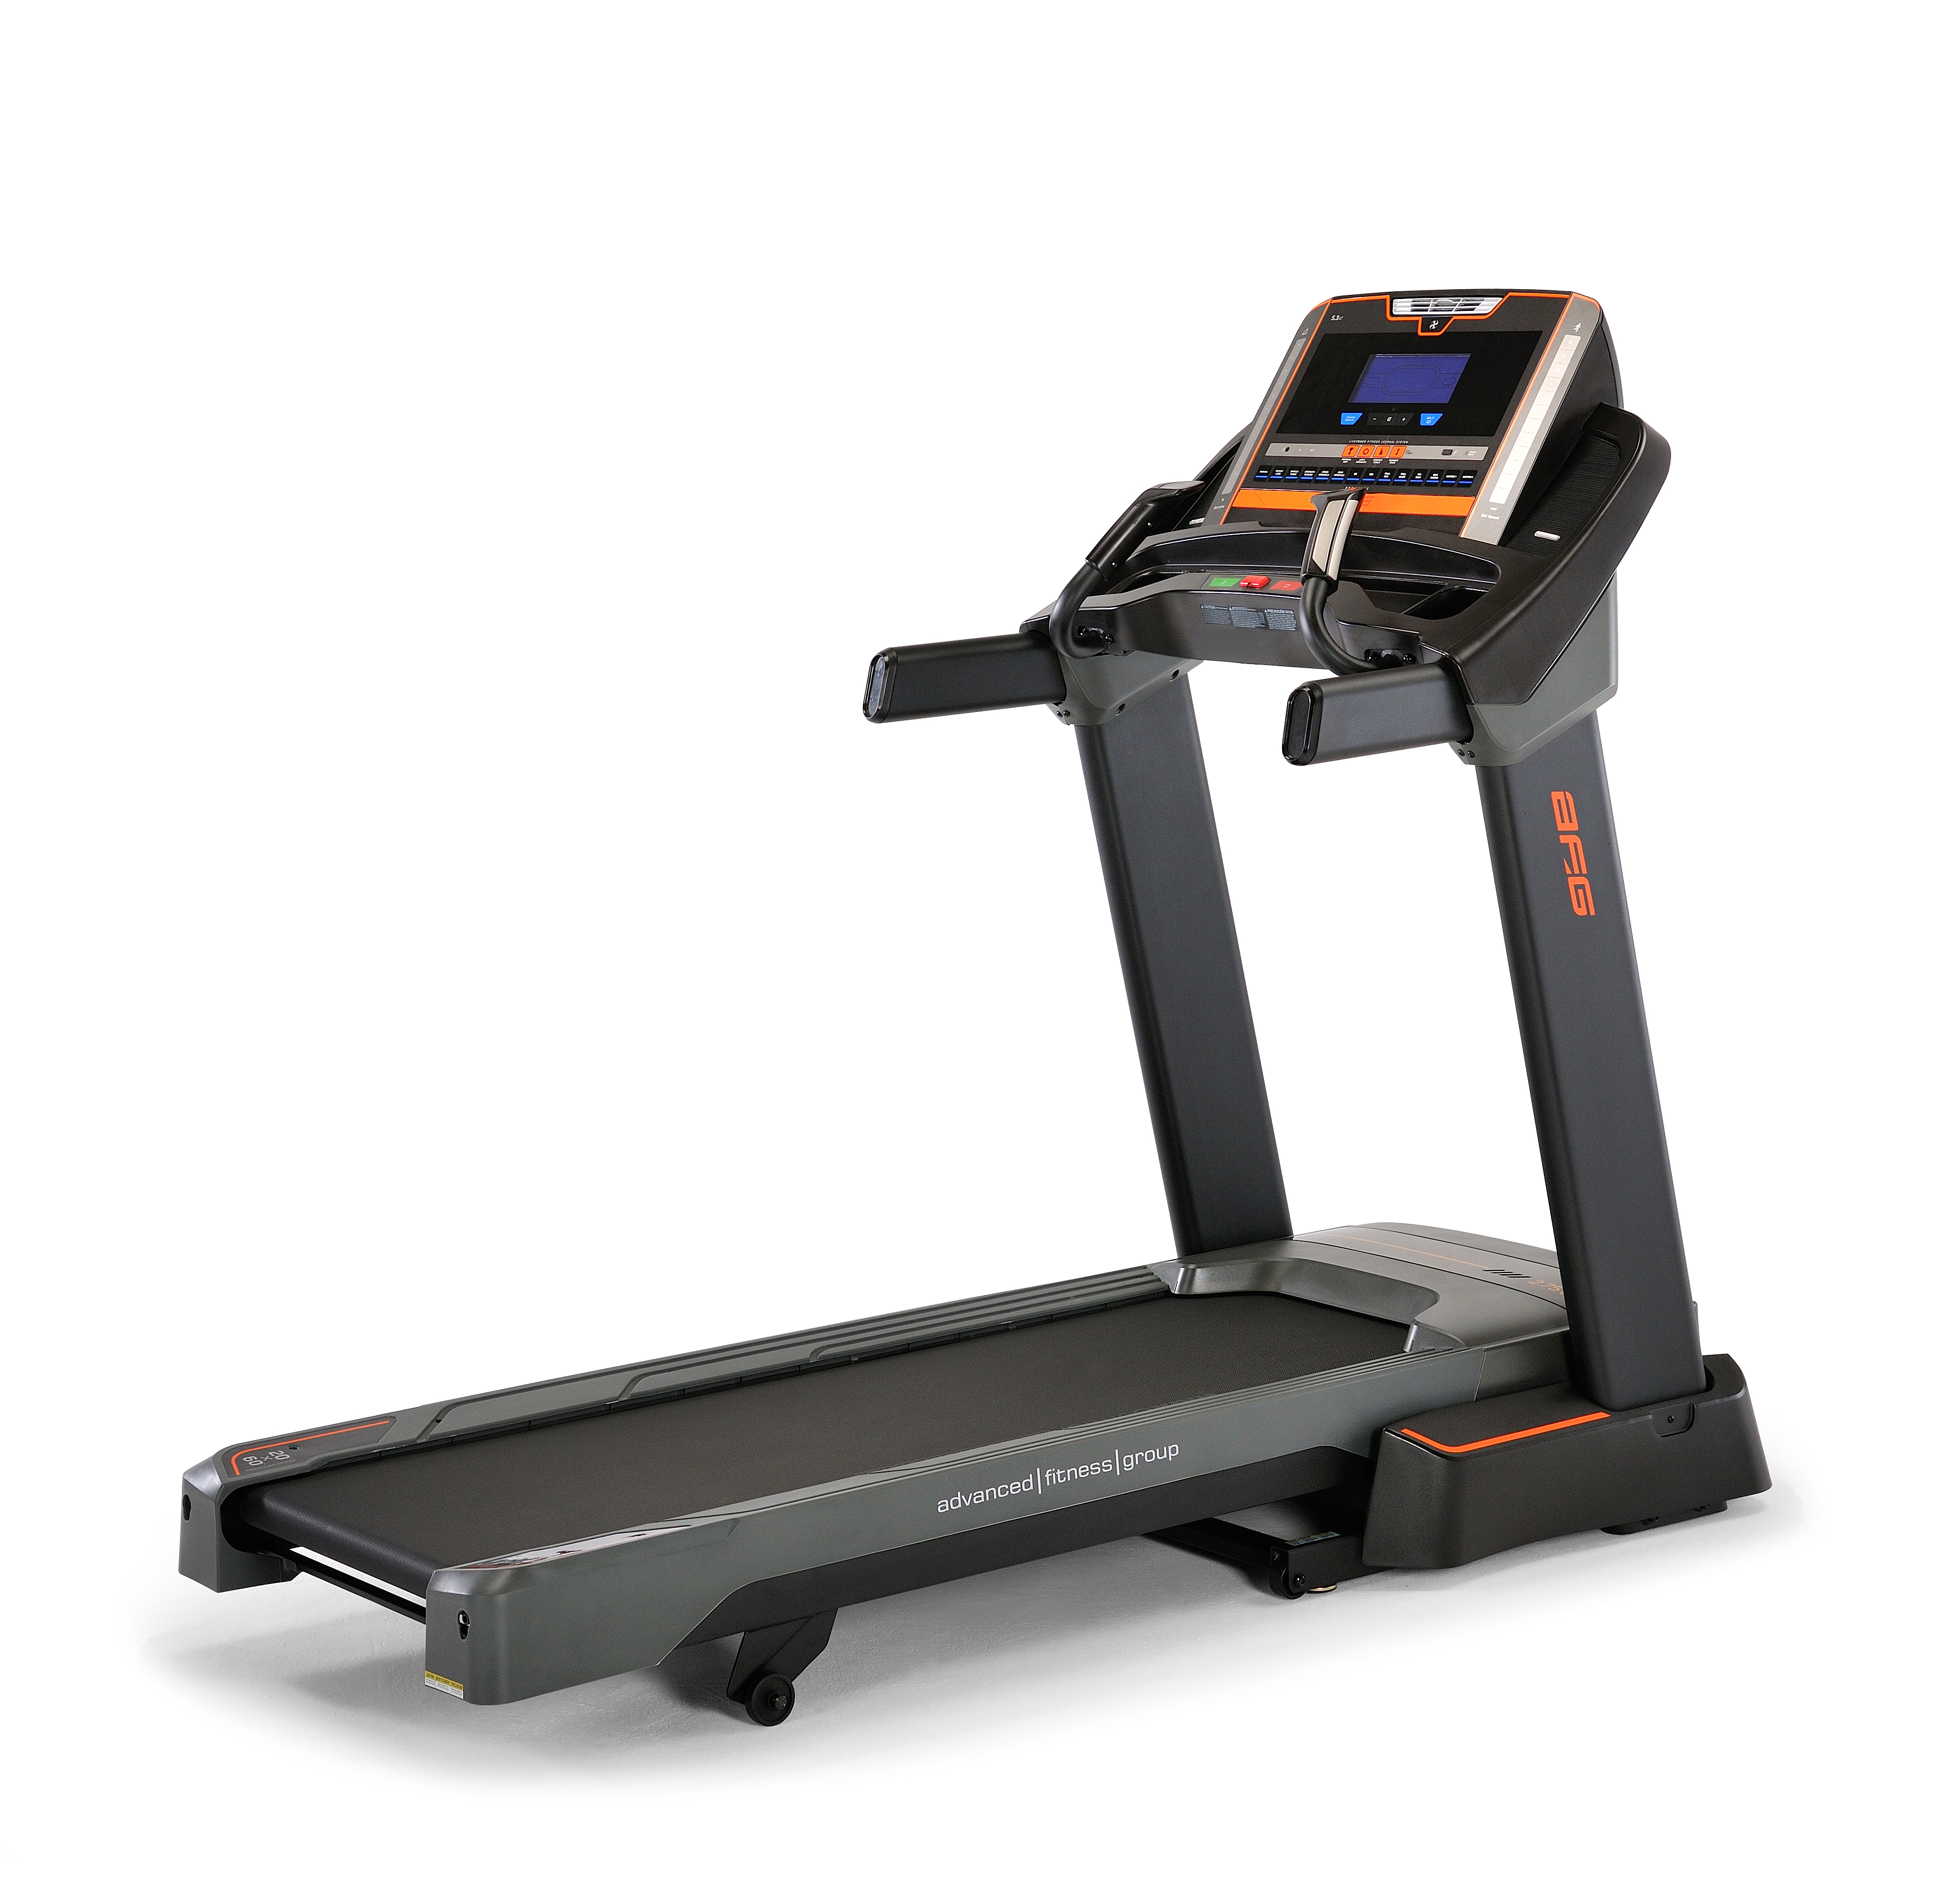 Sports & Fitness Exercise & Fitness Treadmills Store Items 103